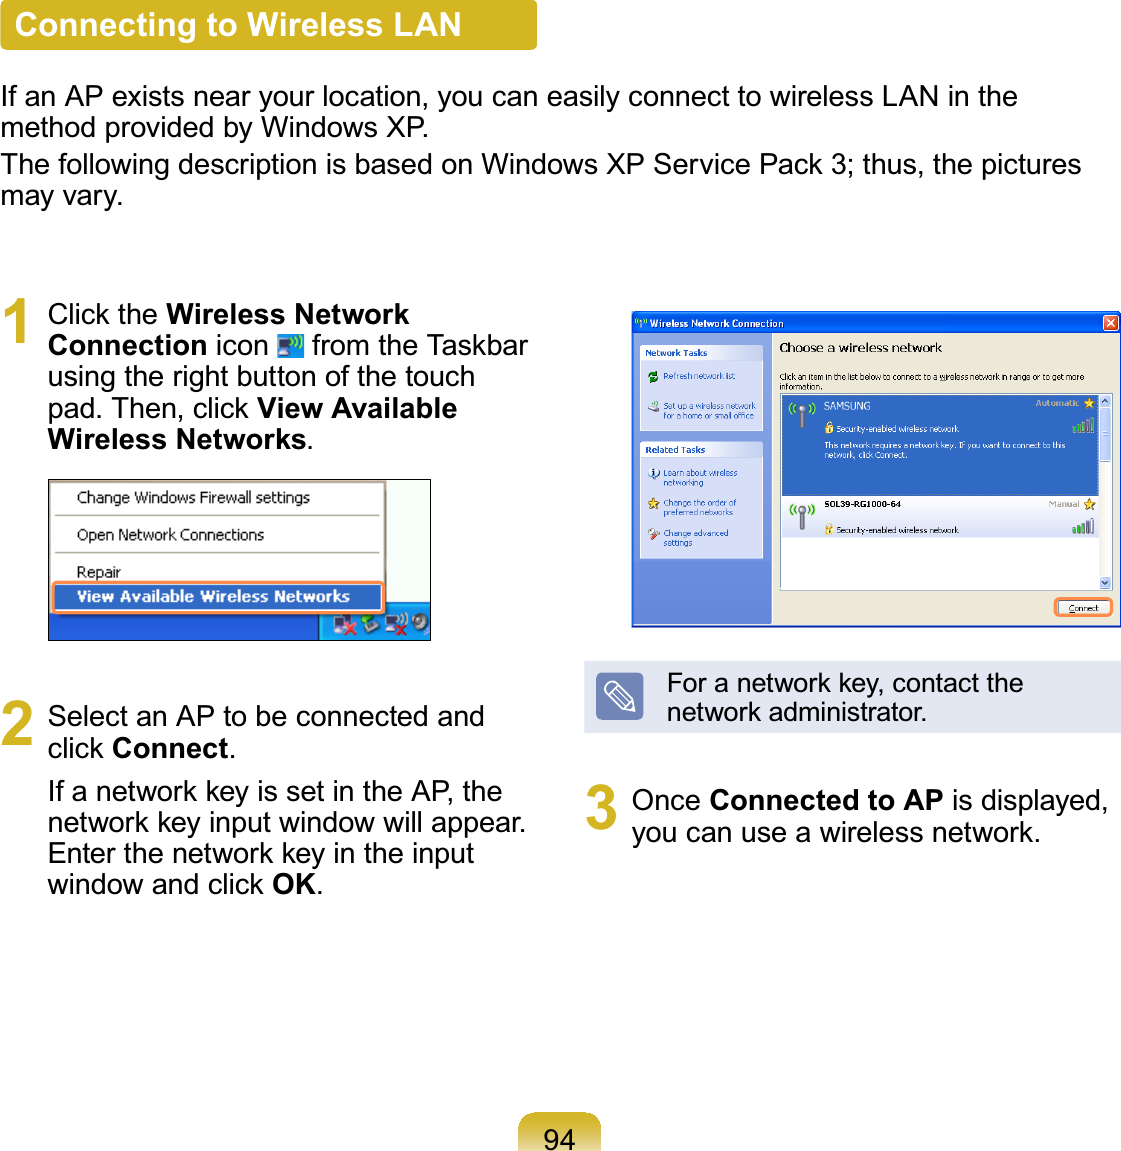 94Connecting to Wireless LANIf an AP exists near your location, you can easily connect to wireless LAN in themethod provided by Windows XP.7KHIROORZLQJGHVFULSWLRQLVEDVHGRQ:LQGRZV;36HUYLFH3DFNWKXVWKHSLFWXUHVmay vary.1 &amp;OLFNWKHWireless Network Connection icon IURPWKH7DVNEDUusing the right button of the touchSDG7KHQFOLFNView Available Wireless Networks.2 Select an AP to be connected andFOLFNConnect.,IDQHWZRUNNH\LVVHWLQWKH$3WKHQHWZRUNNH\LQSXWZLQGRZZLOODSSHDU(QWHUWKHQHWZRUNNH\LQWKHLQSXWZLQGRZDQGFOLFNOK.)RUDQHWZRUNNH\FRQWDFWWKHQHWZRUNDGPLQLVWUDWRU3 Once Connected to AP is displayed,\RXFDQXVHDZLUHOHVVQHWZRUN